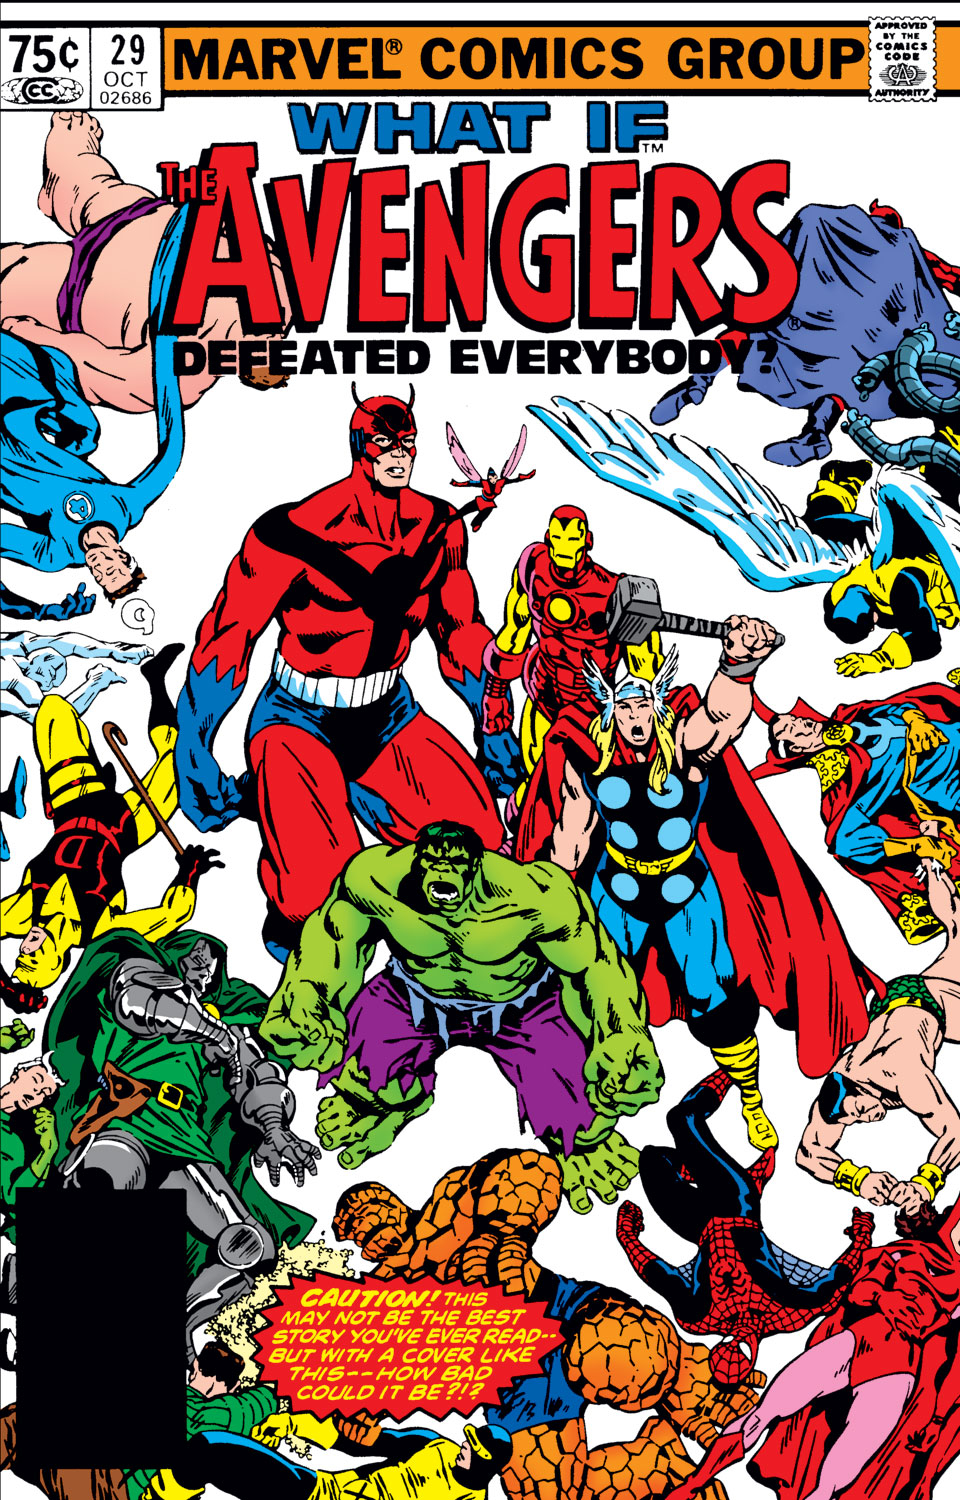 What If? (1977) issue 29 - The Avengers defeated everybody - Page 1